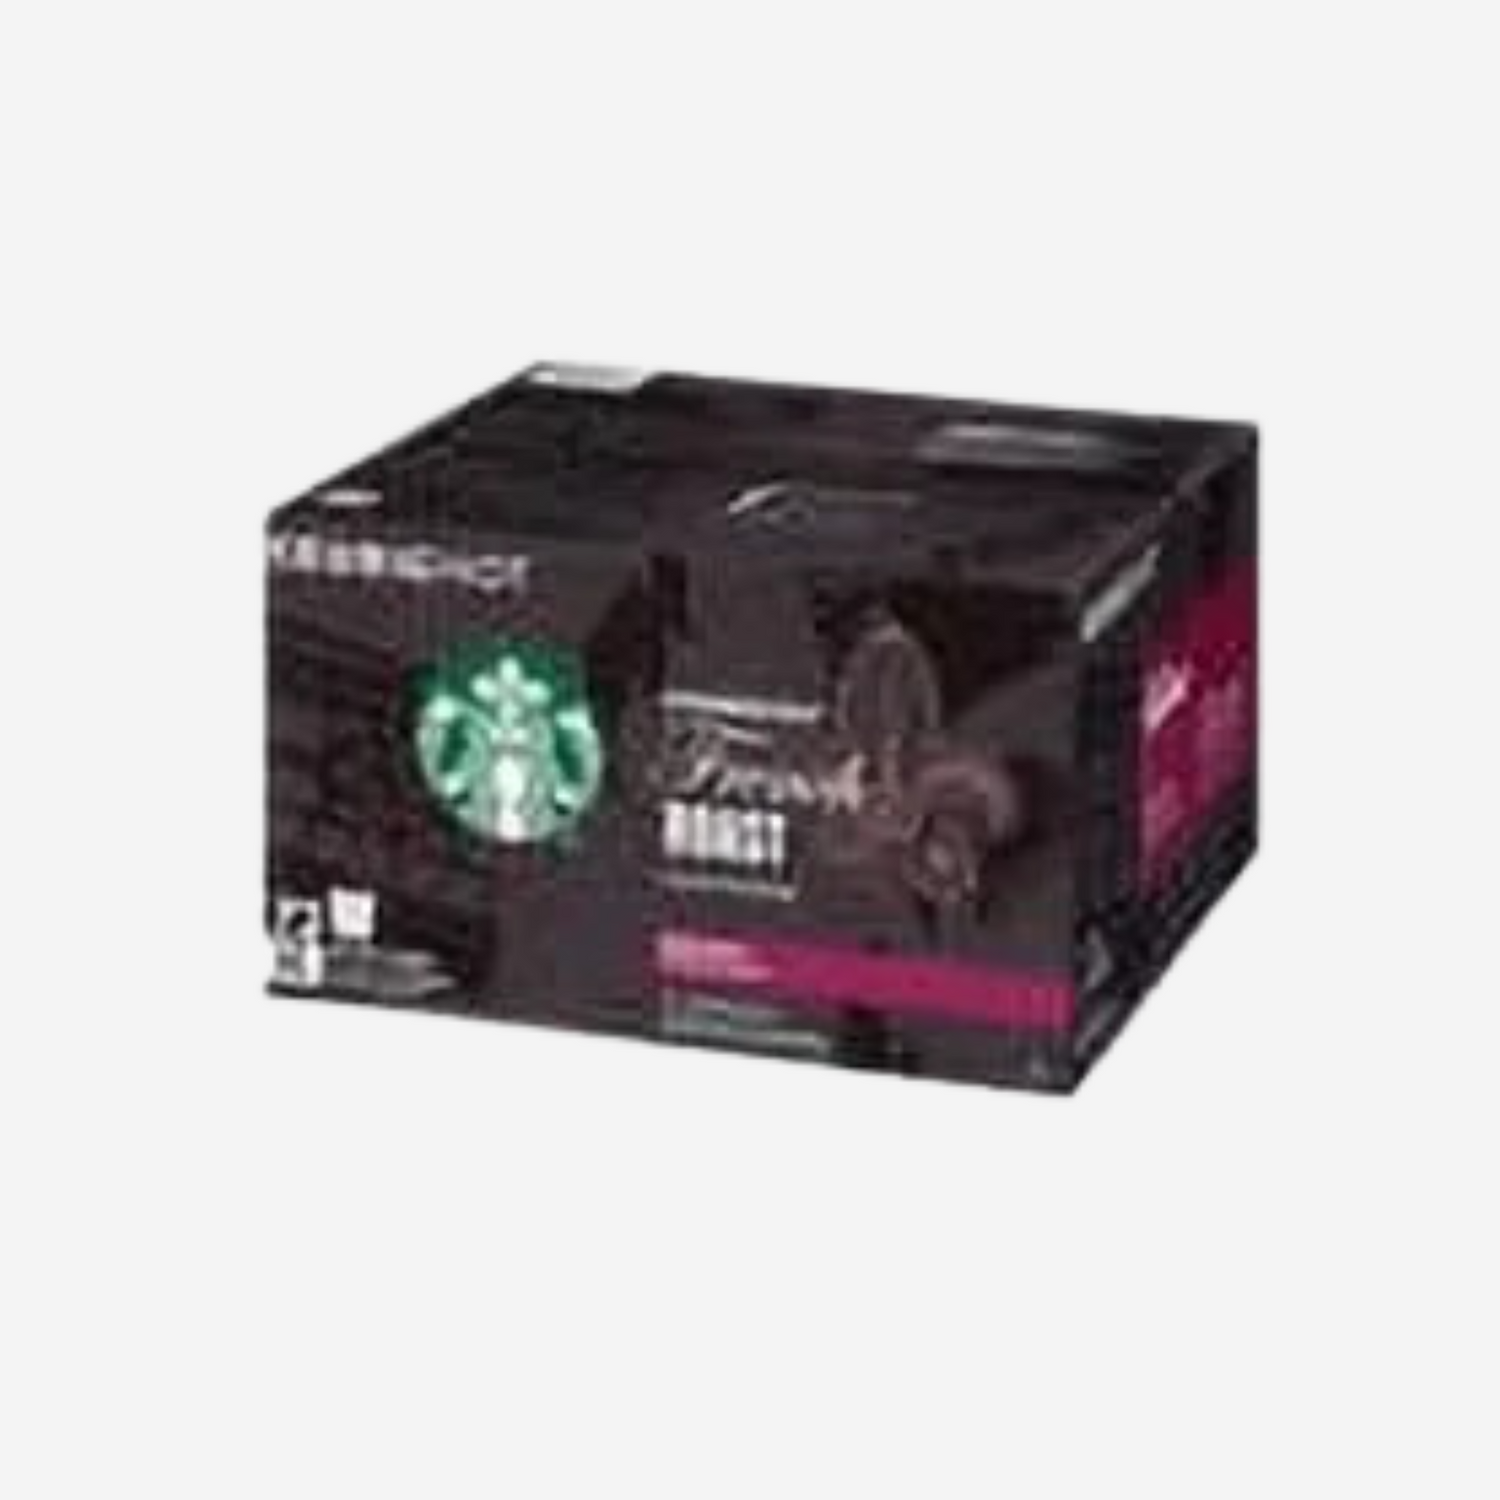 Starbucks French Roast K-Cup Coffee Pods, 72 Count